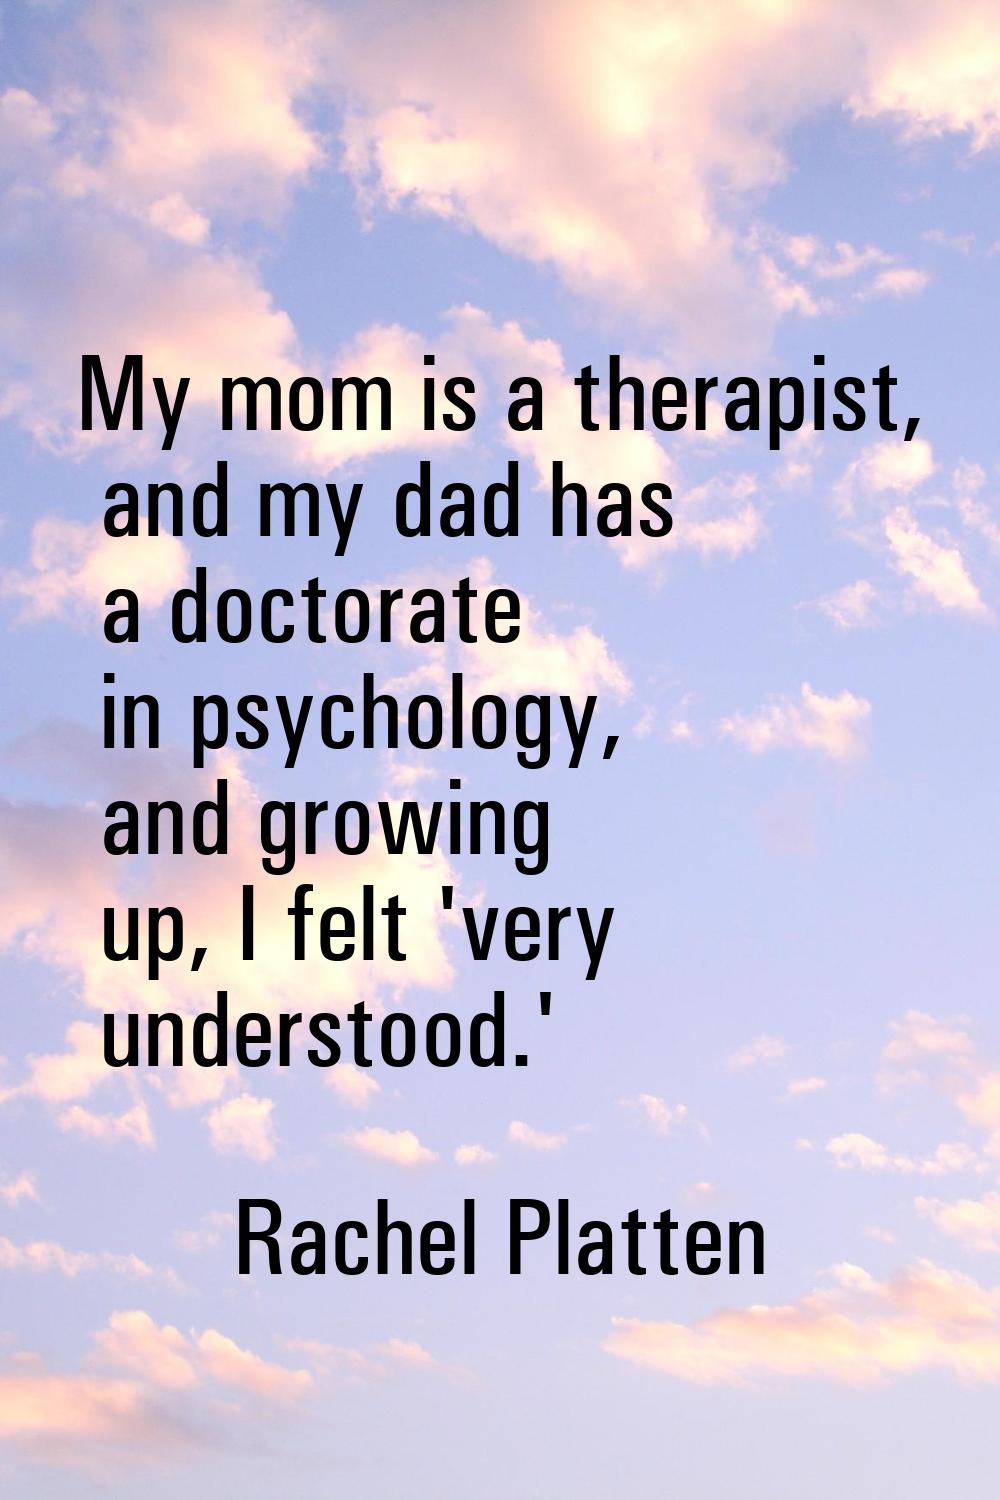 My mom is a therapist, and my dad has a doctorate in psychology, and growing up, I felt 'very under